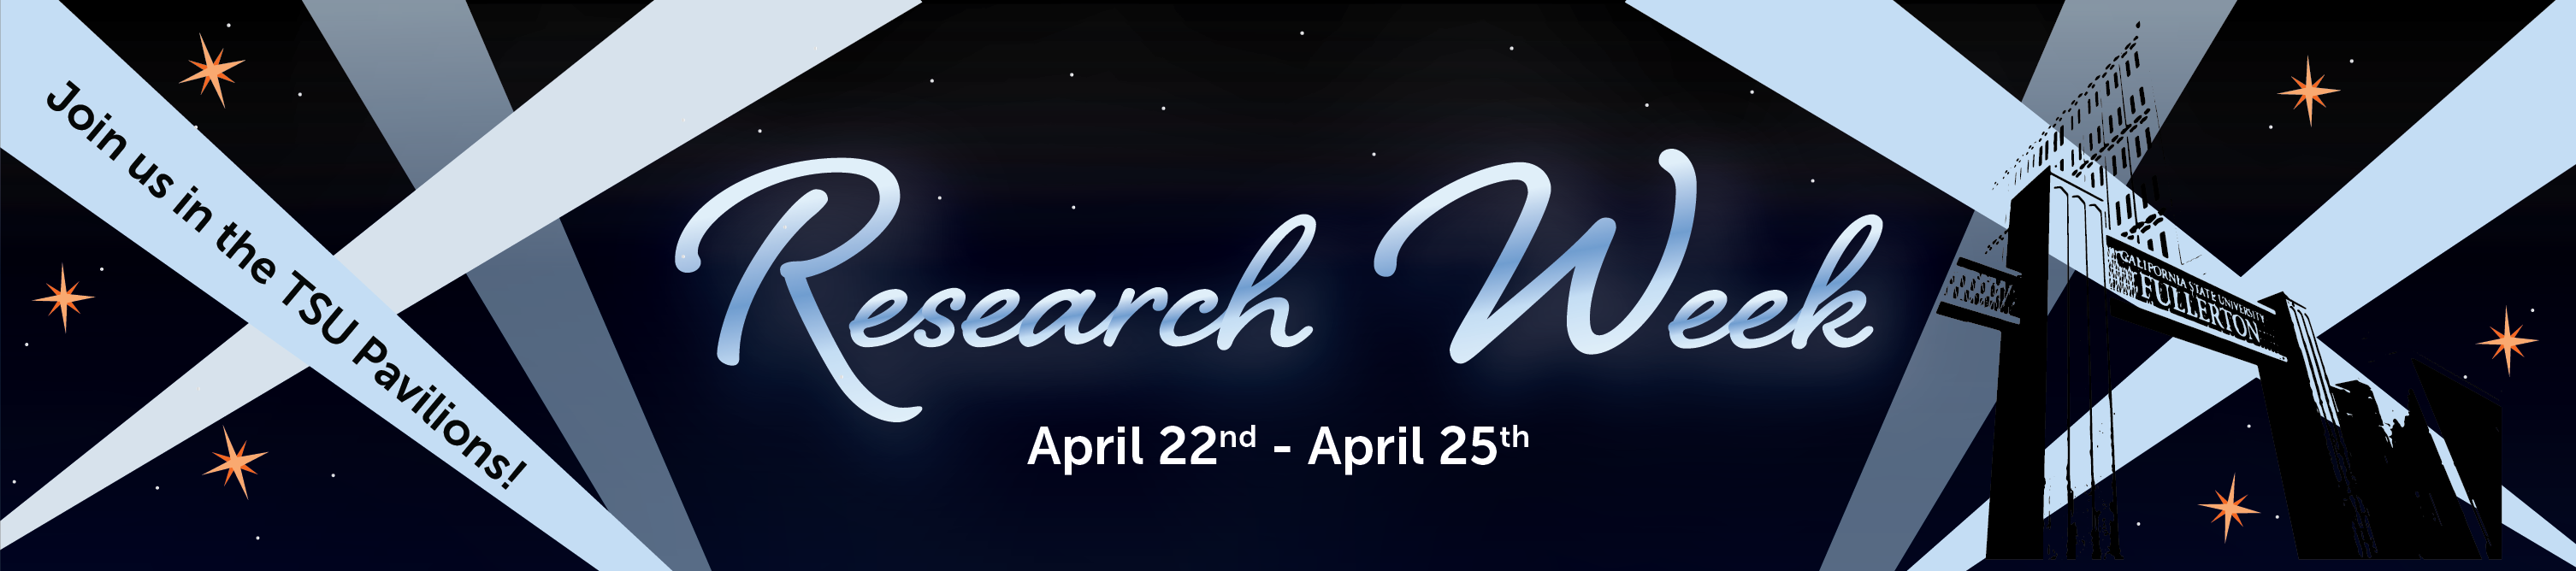 Research Week Banner